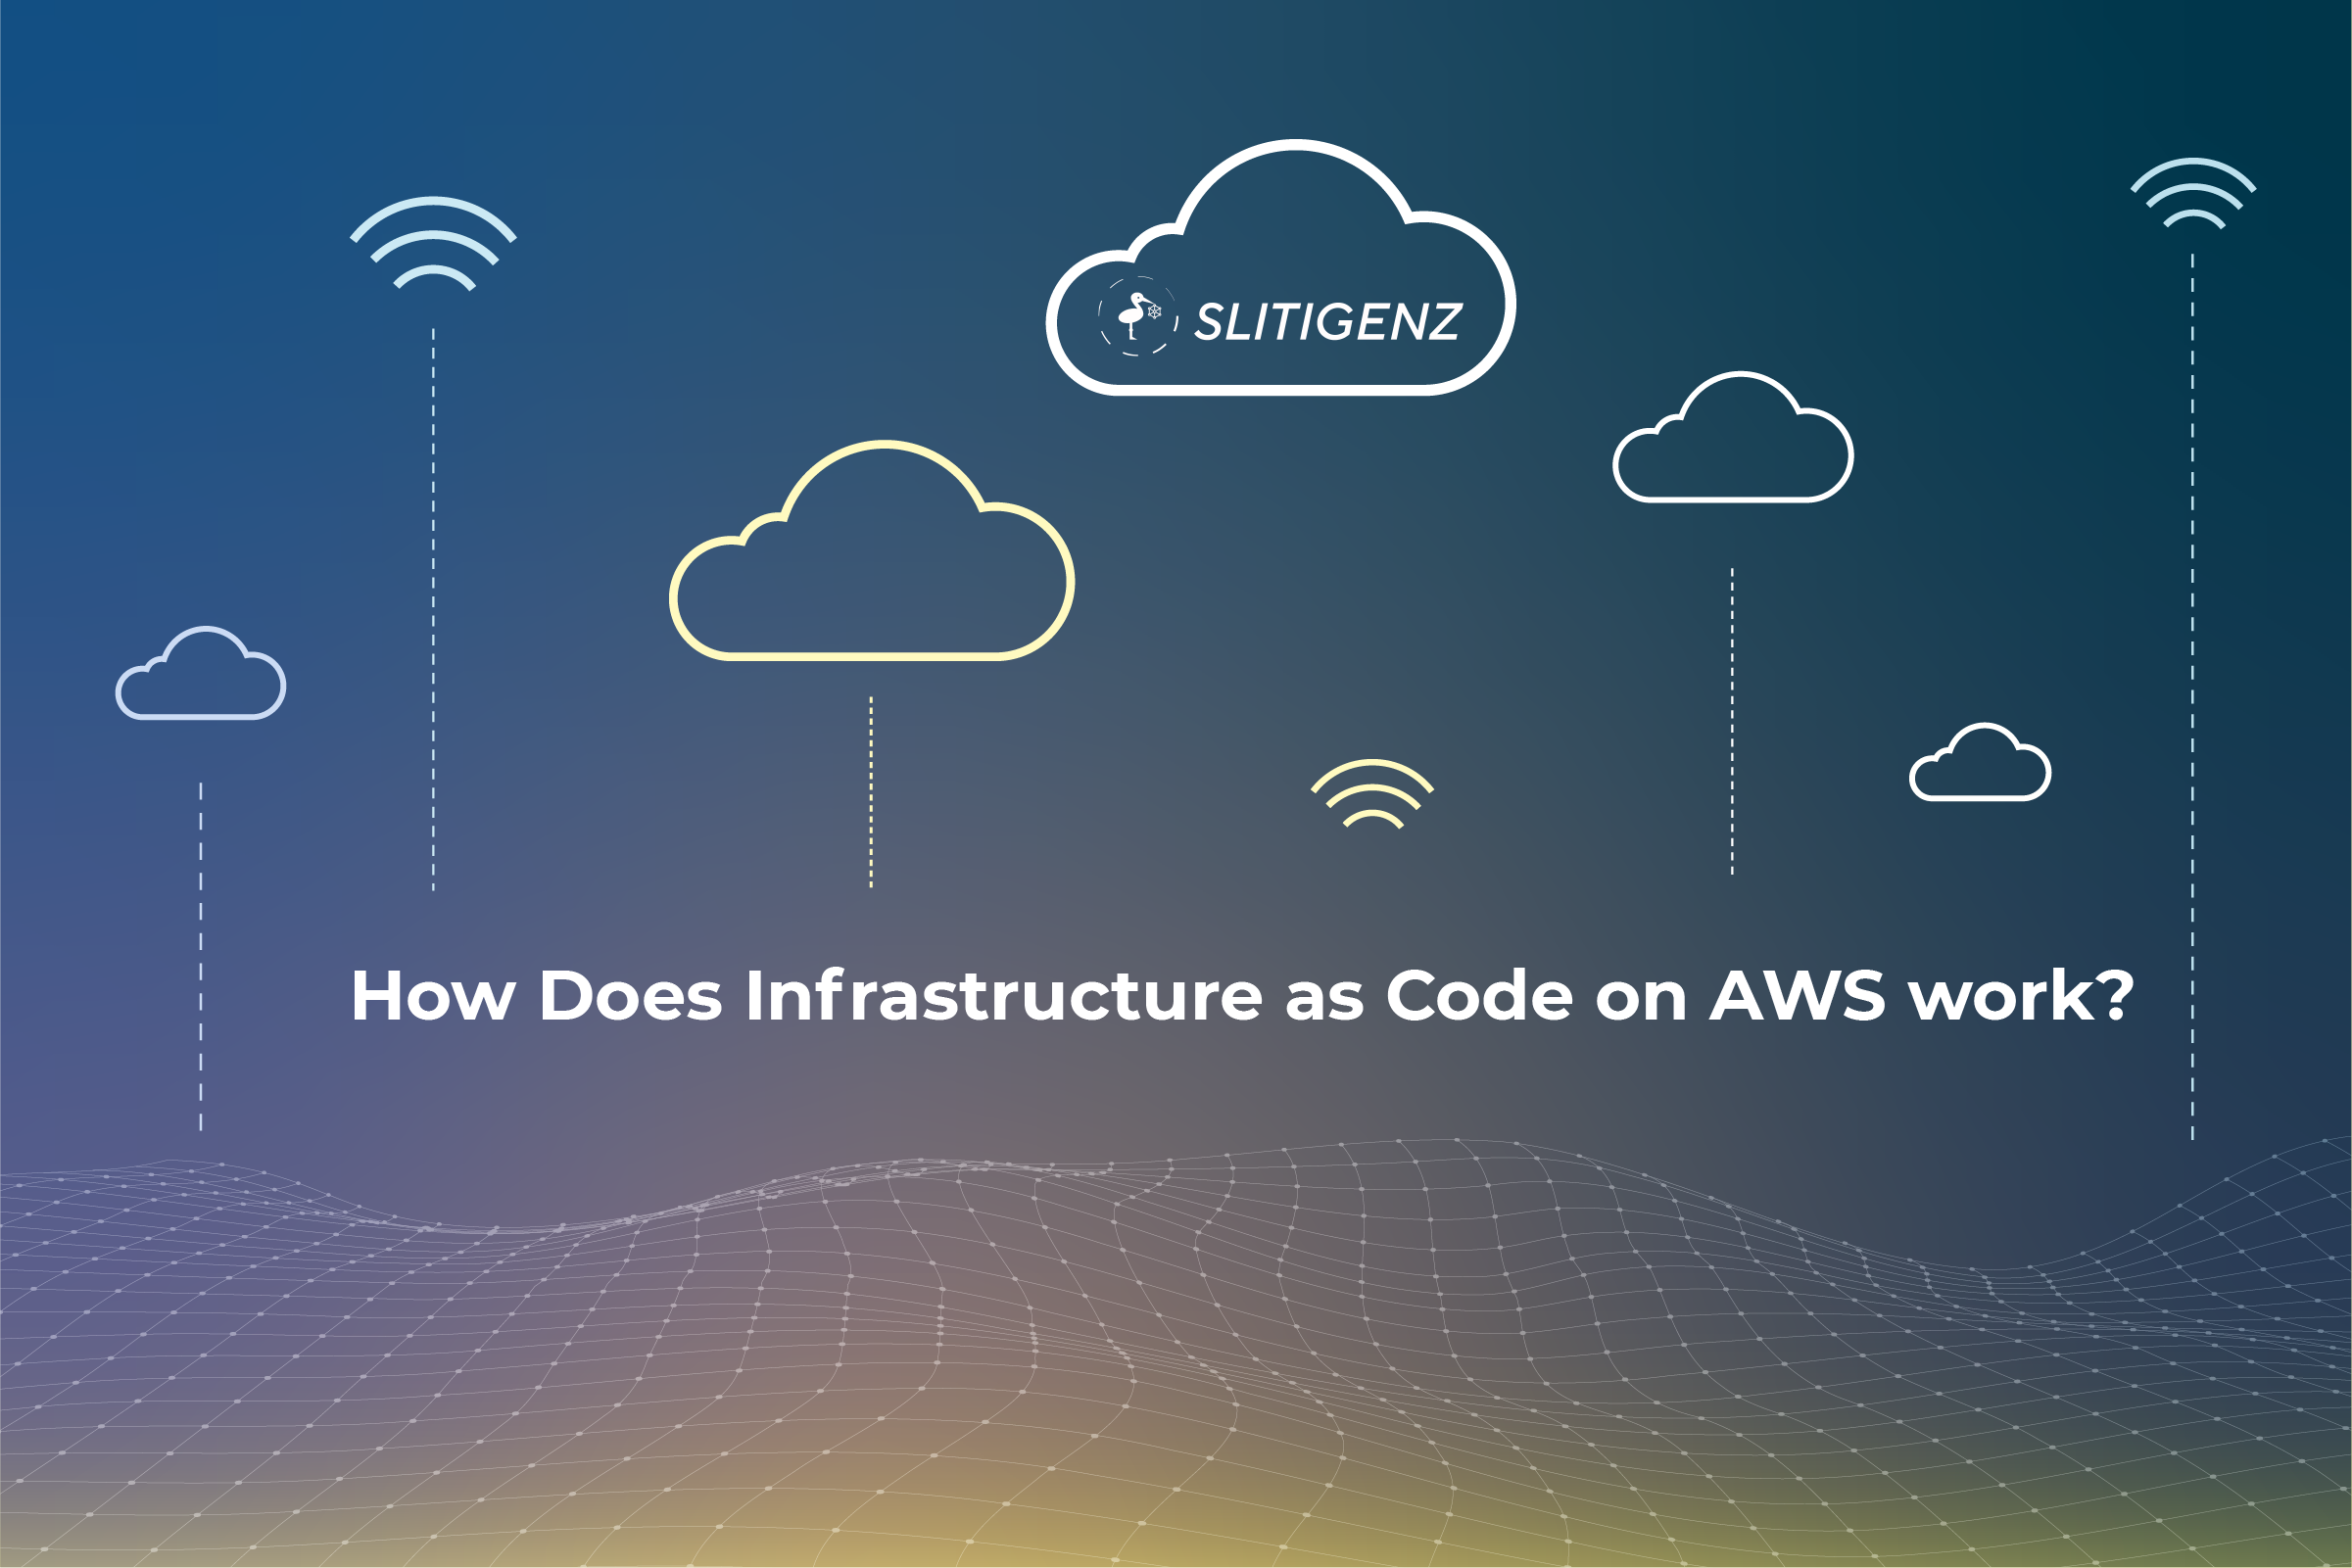 What is Infrastructure as Code (IaC)? How Does Infrastructure as Code on AWS work? 